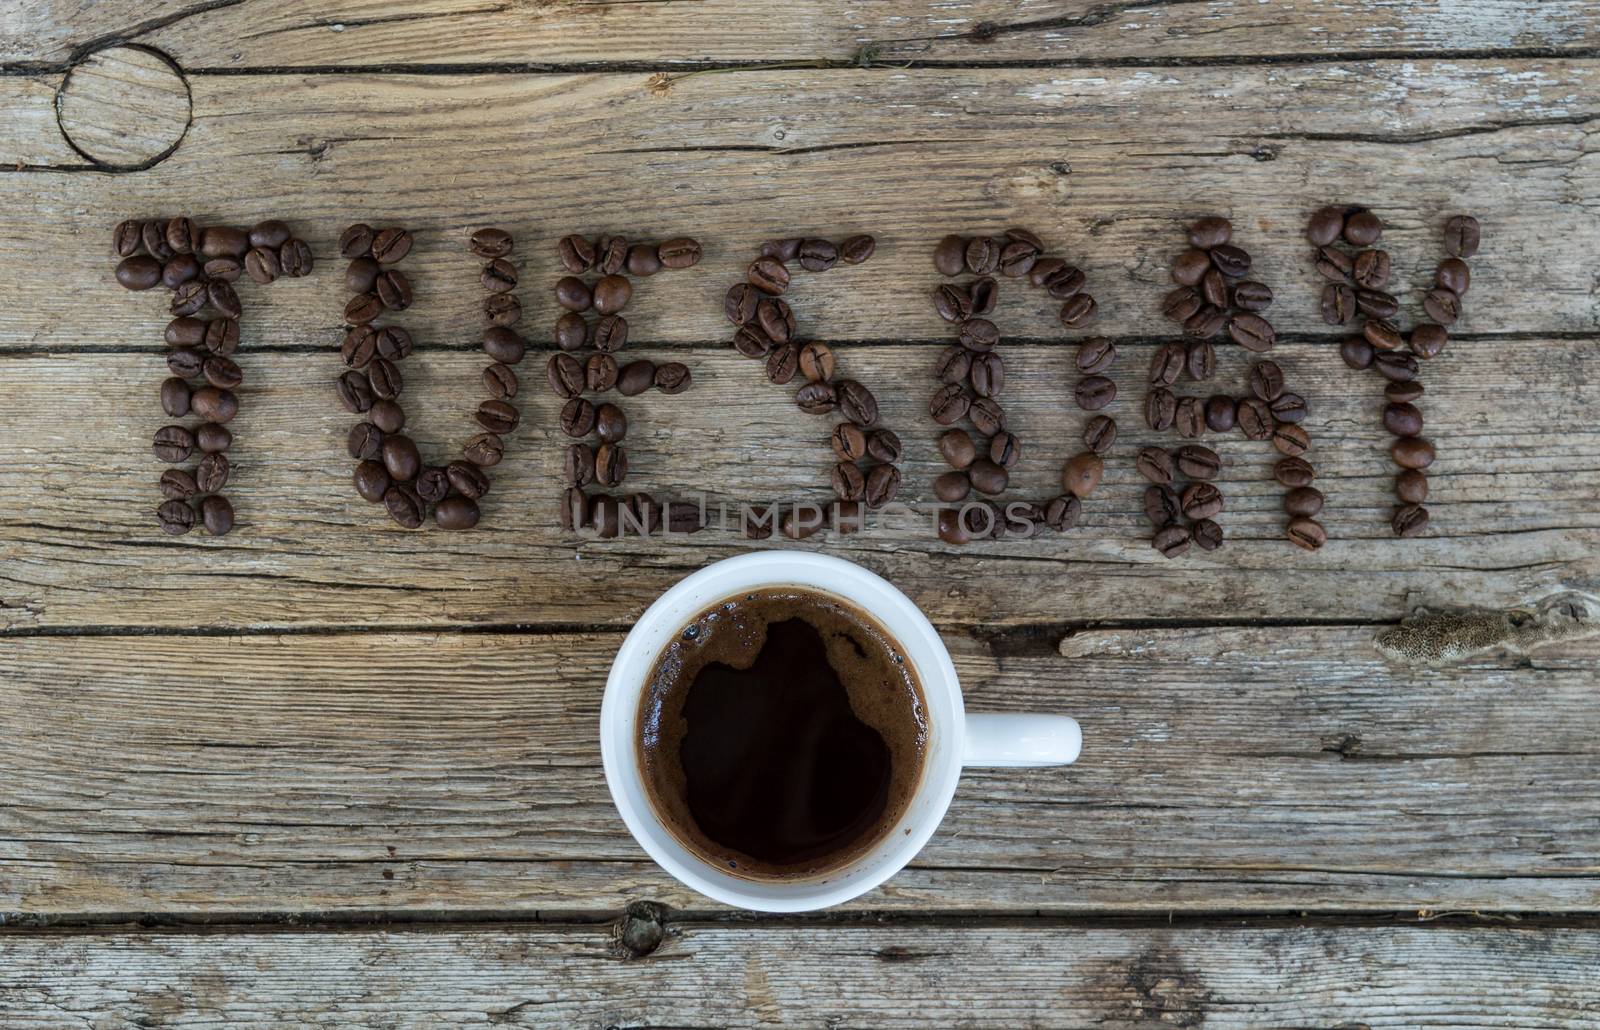 Cup of coffee on wooden background and TUESDAY coffee beans 